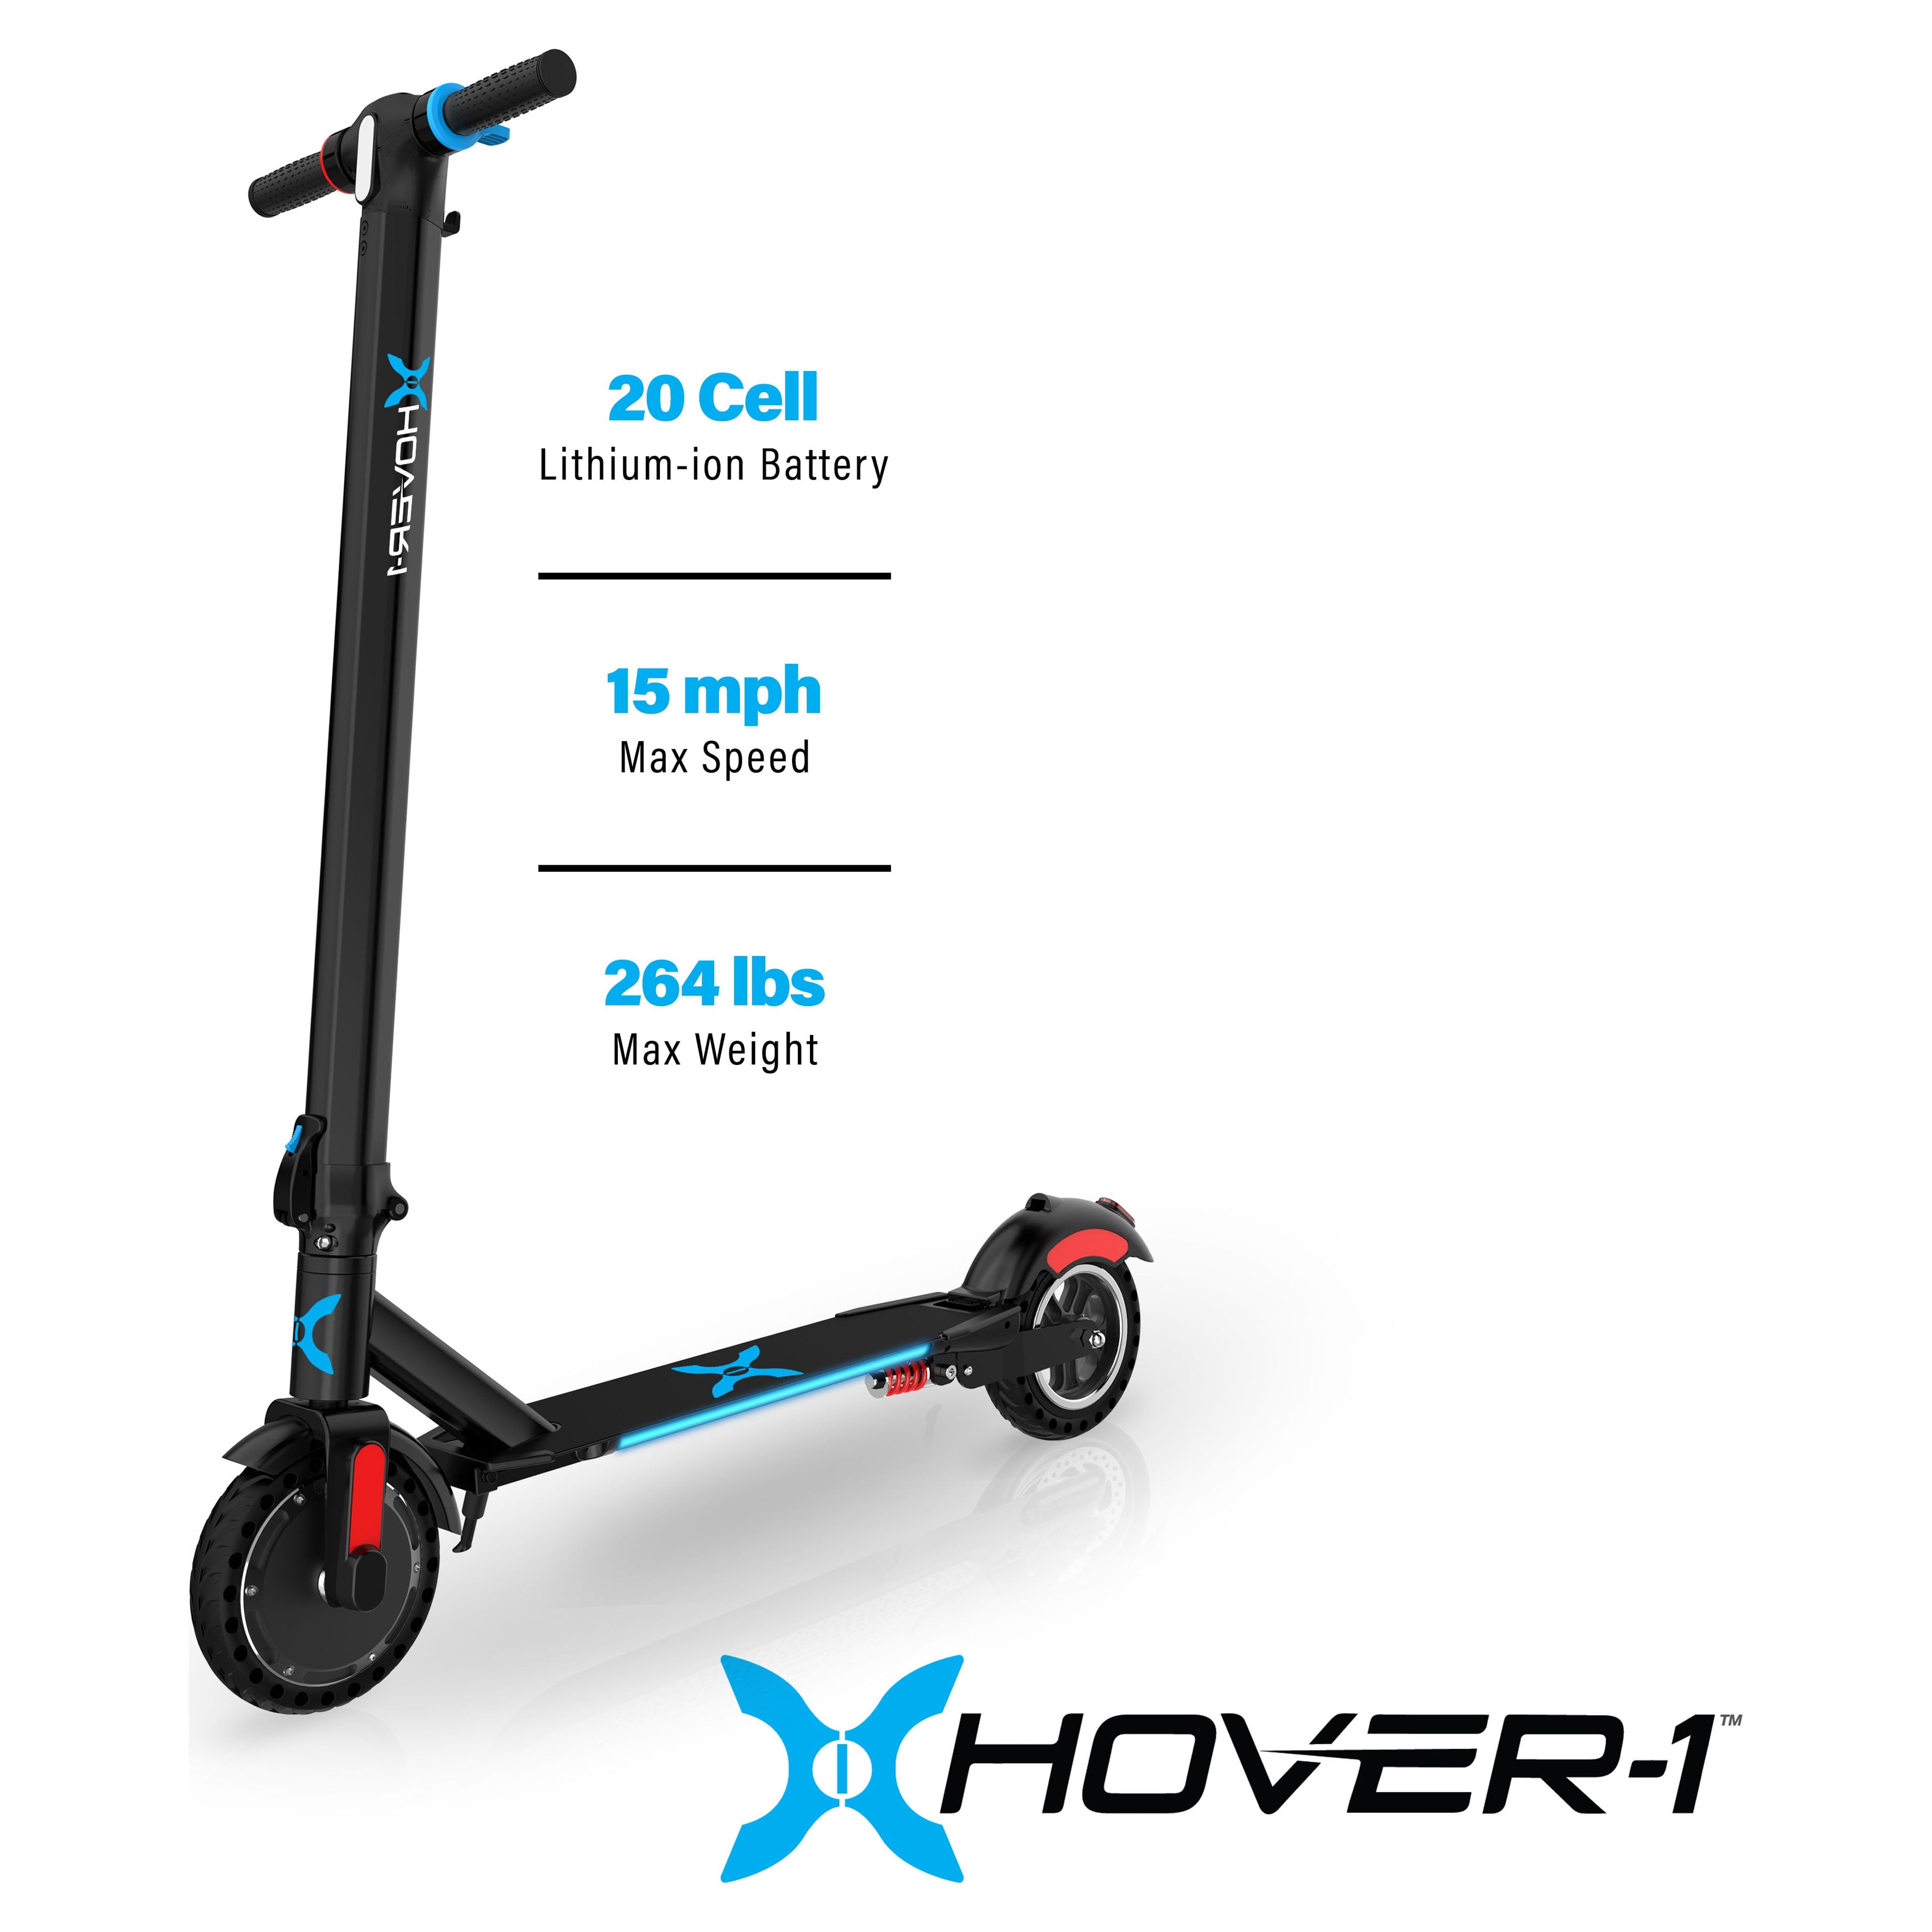 Hover-1 Eagle Electric Folding Scooter for Adults,15 mph Max Speed, LED Headlight, UL 2272 Certified - image 3 of 14